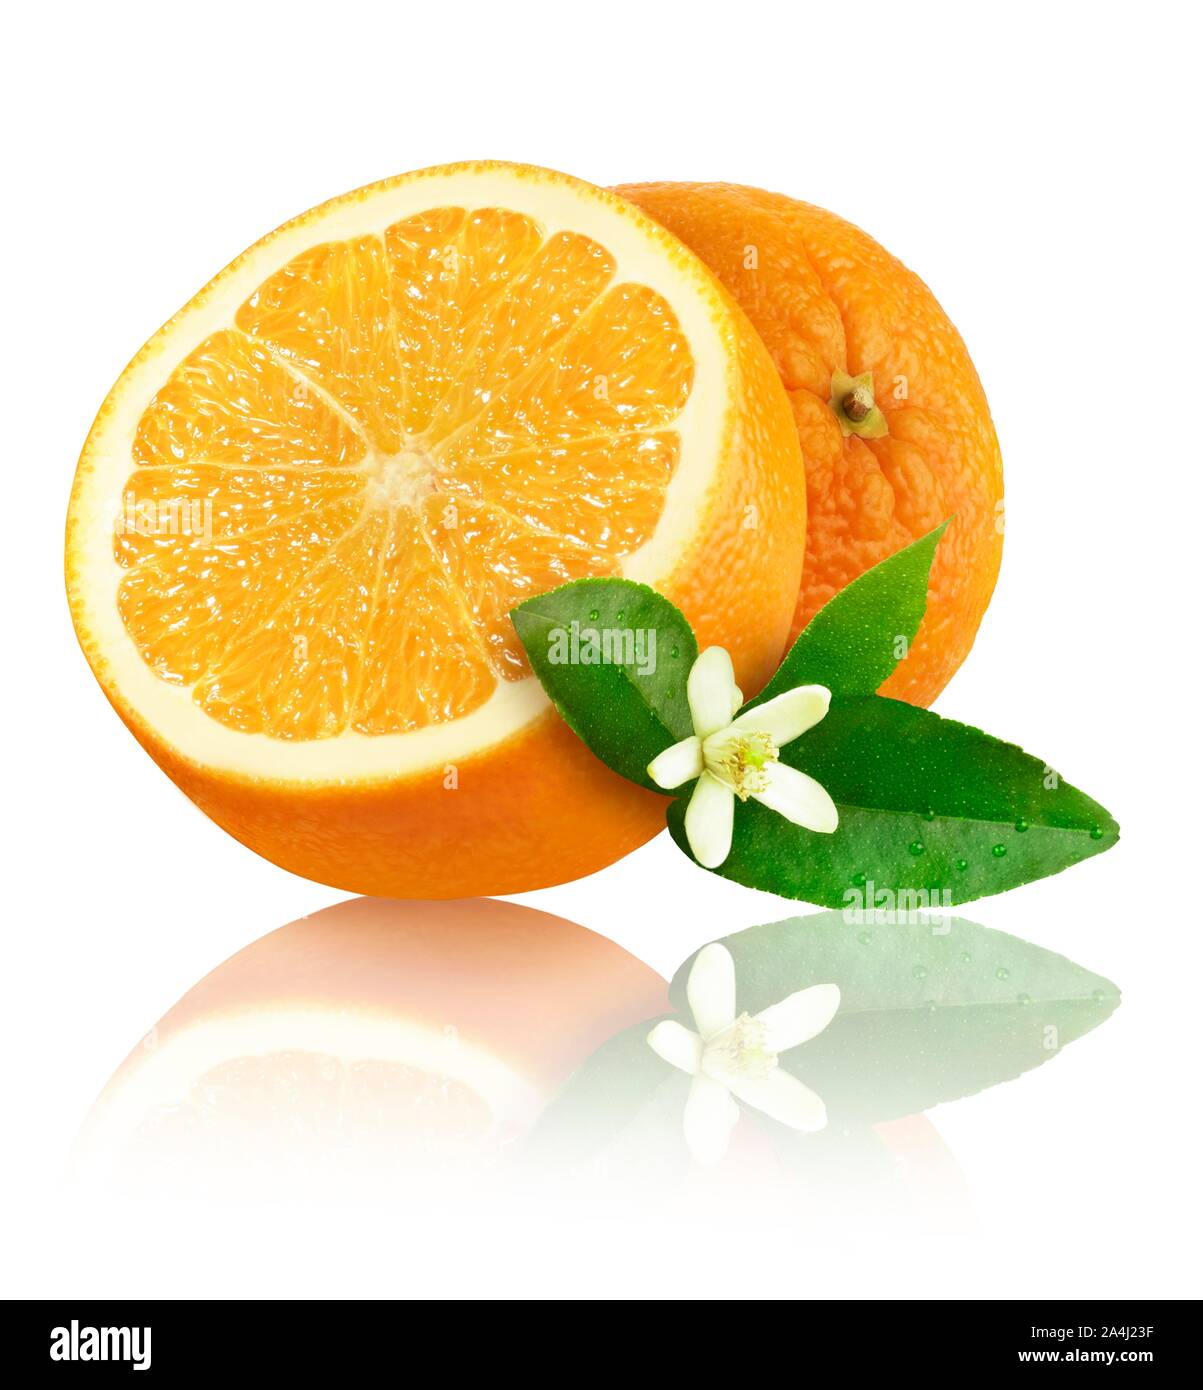 Oranges (Citrus x sinensis), with leaves and blossom, cut and whole fruit, cutout, studio shot, Germany Stock Photo